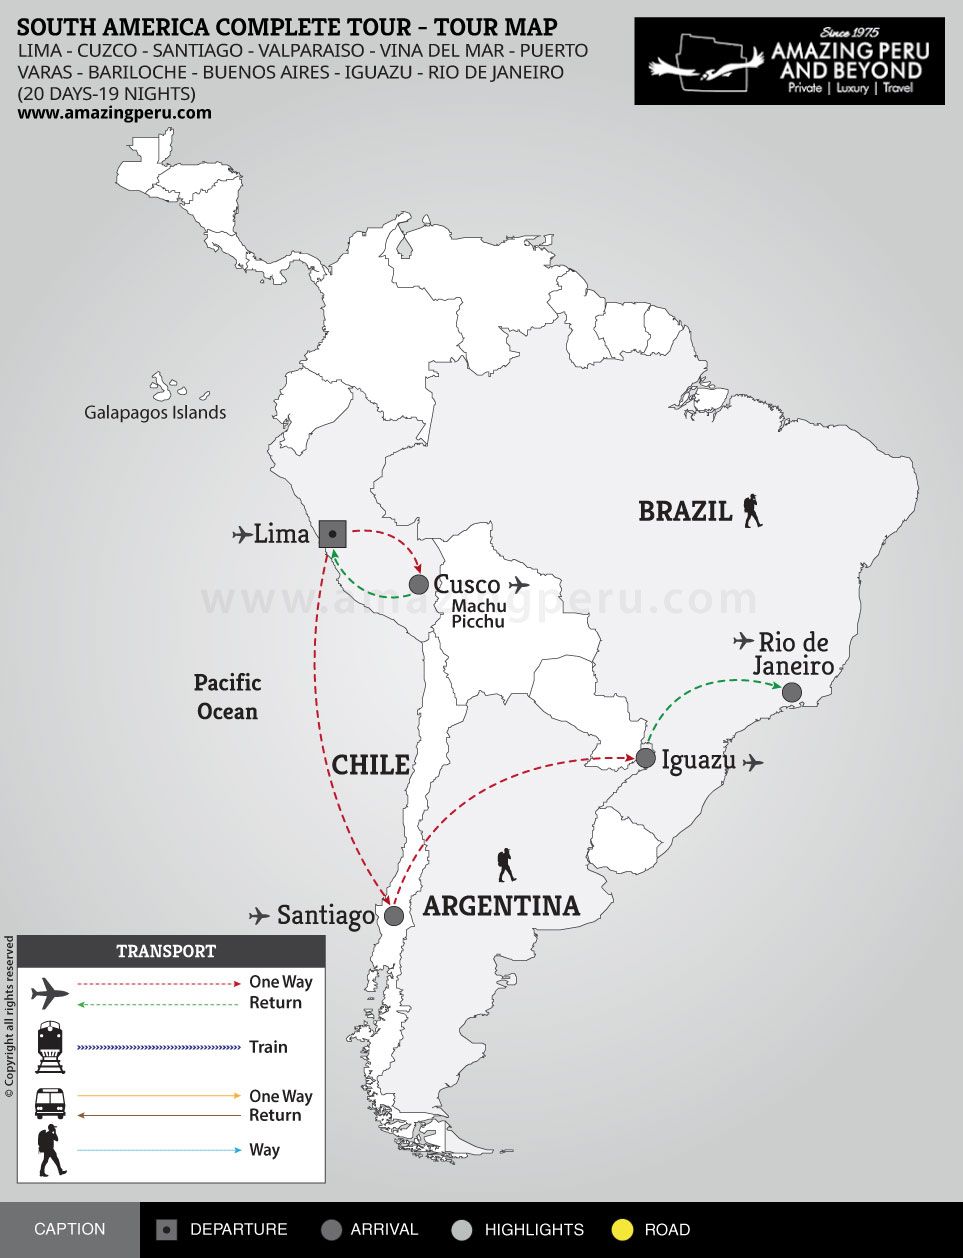 South America Complete Tour<br />Peru, Chile, Argentina & Brazil Tour - 20 days / 19 nights.